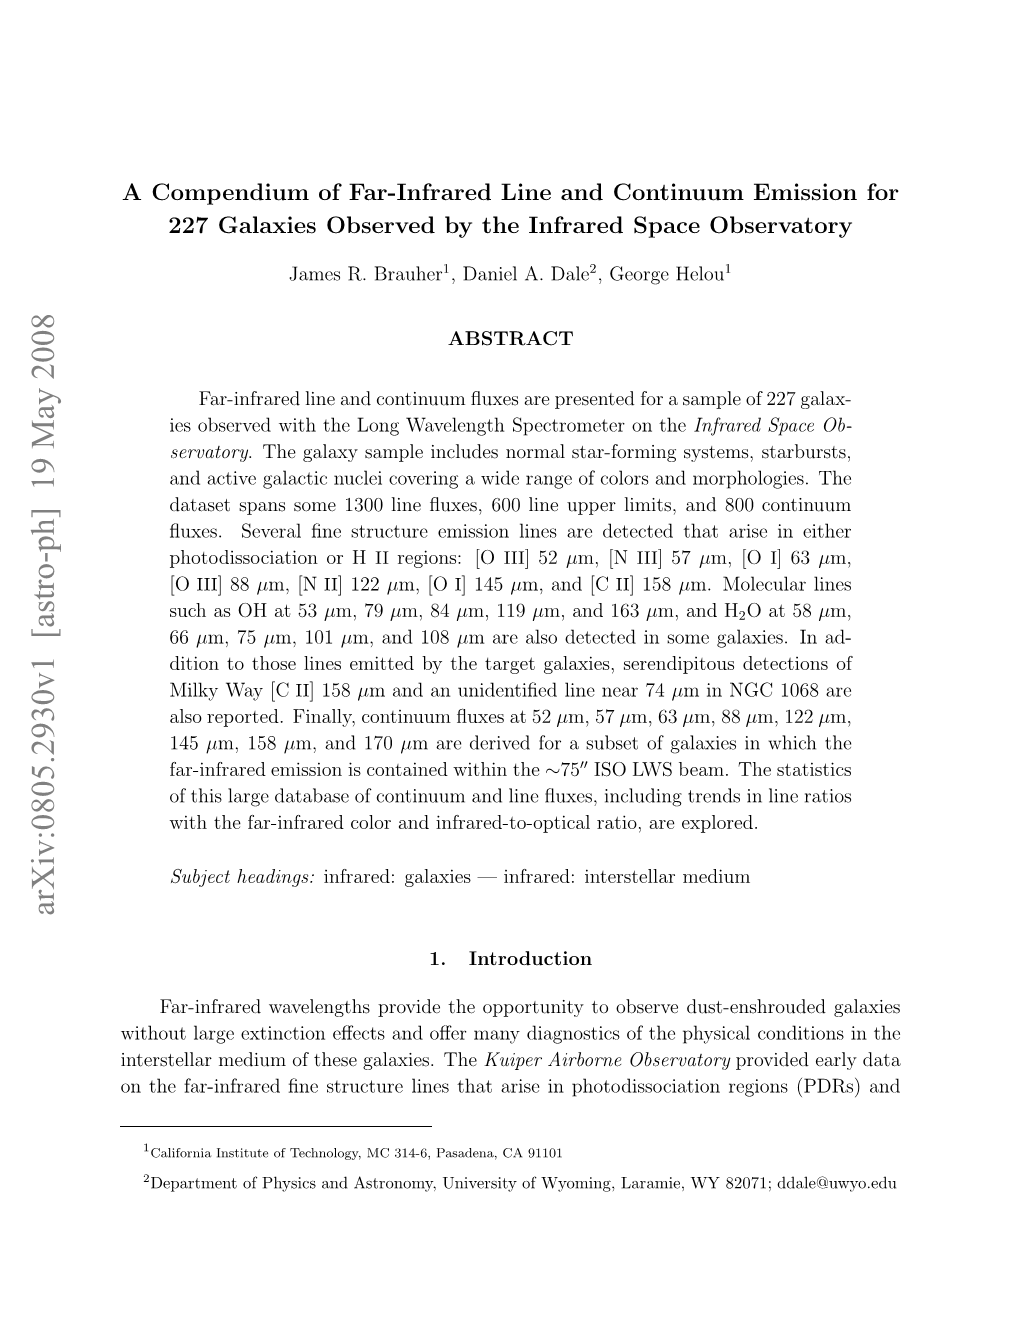 A Compendium of Far-Infrared Line and Continuum Emission for 227